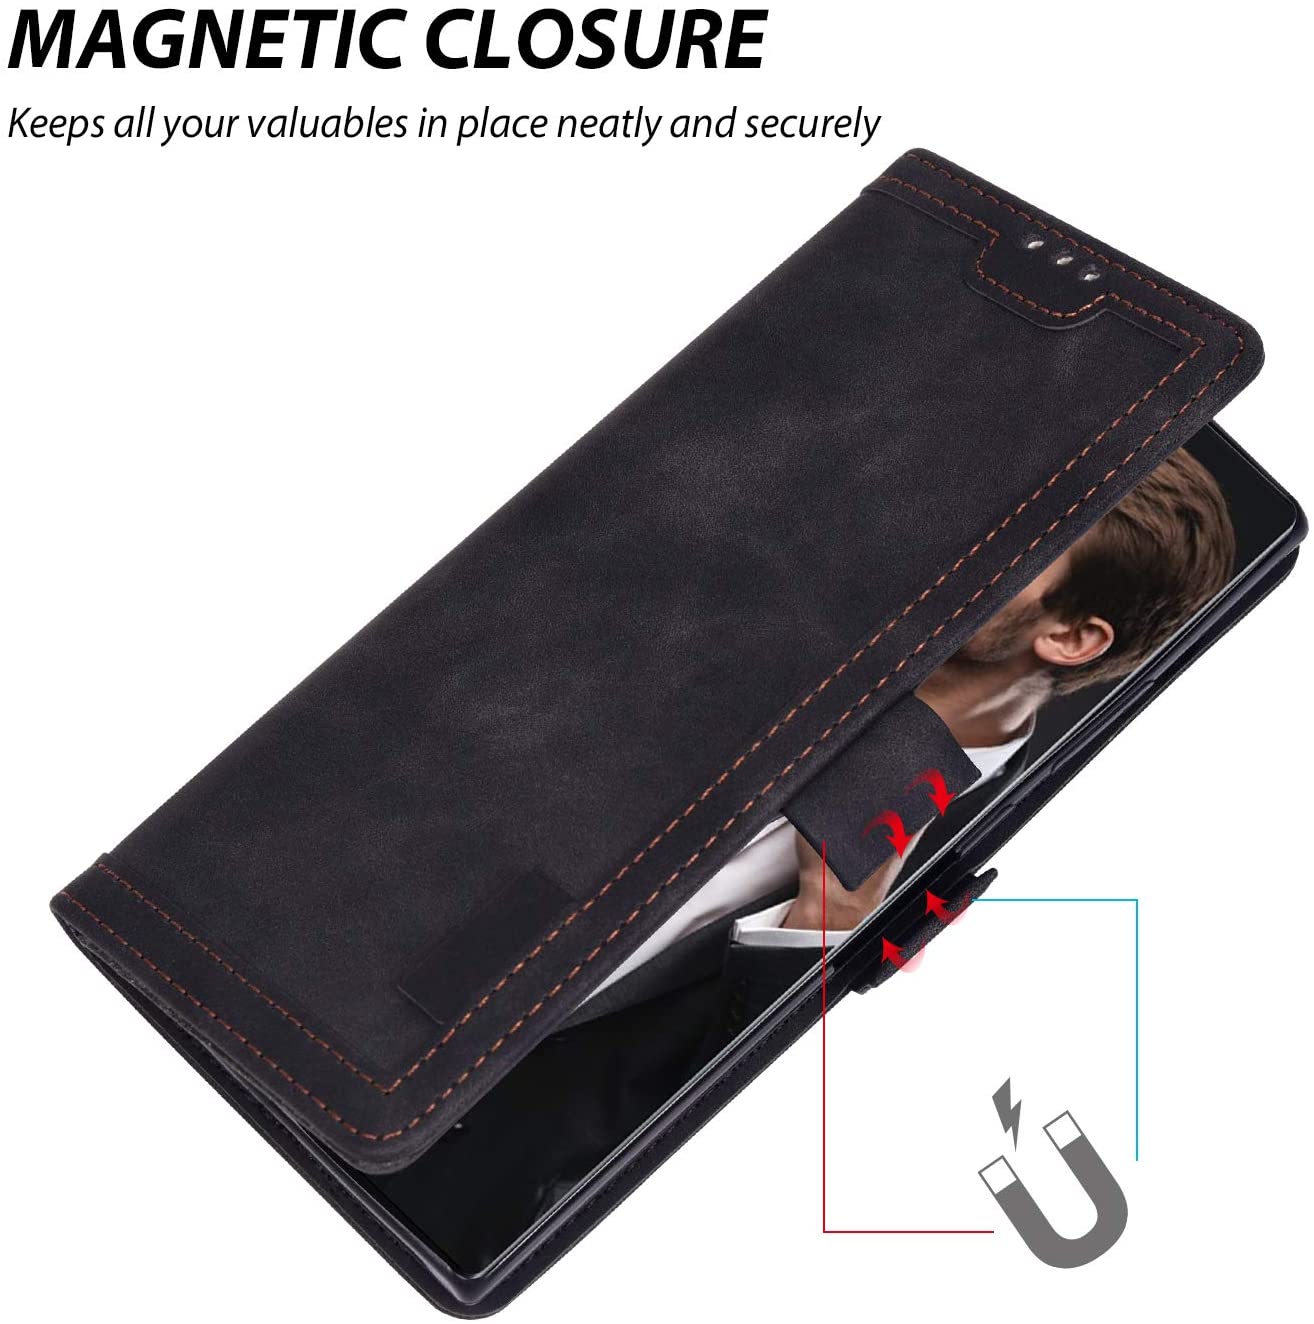 Excelsior Premium PU Leather Wallet flip Cover Case For Samsung Galaxy Note 10 Plus